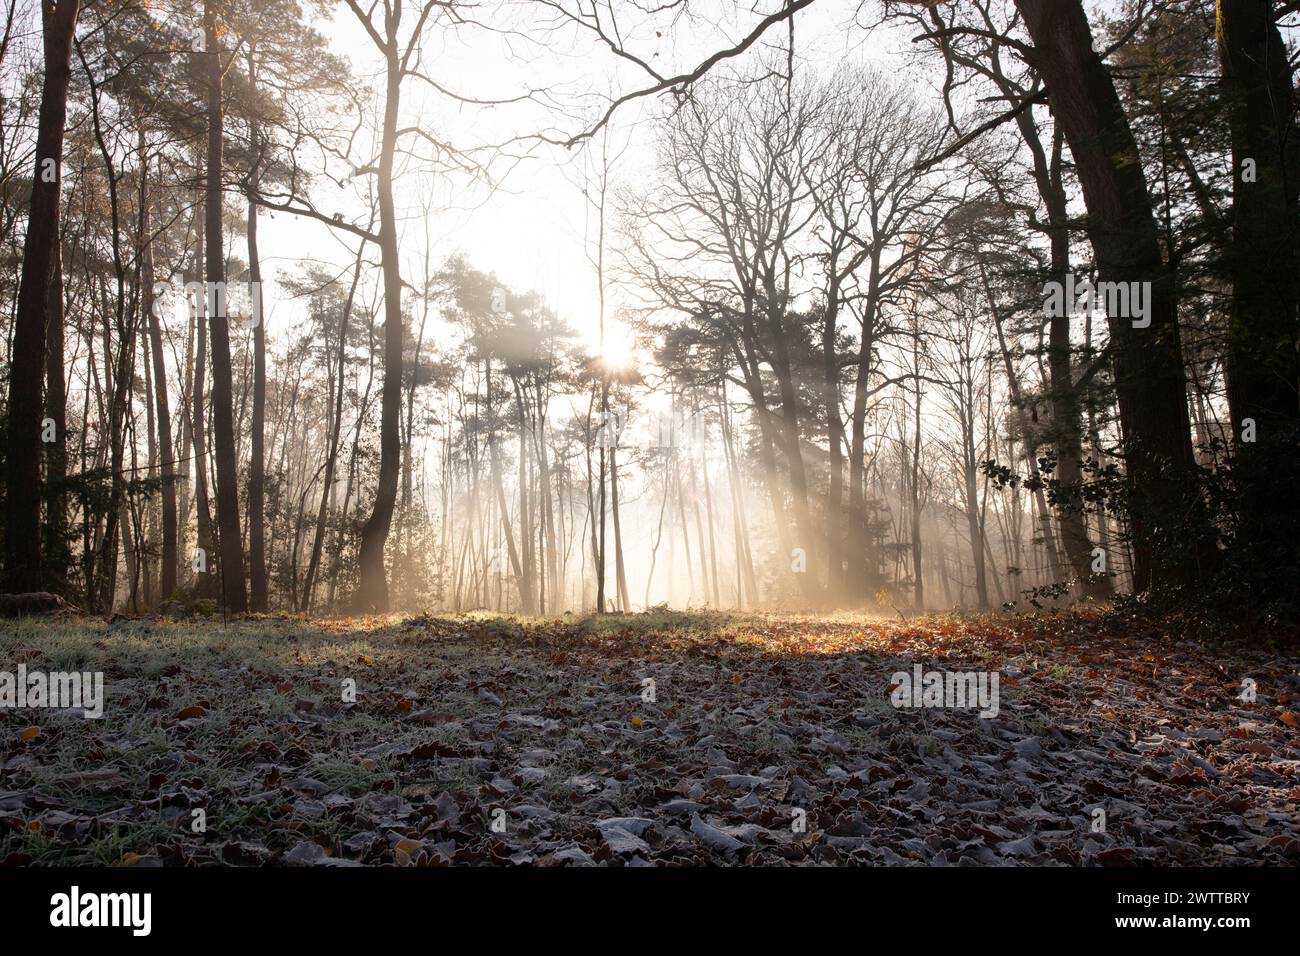 Misty forest sunrise with golden light filtering through the trees Stock Photo